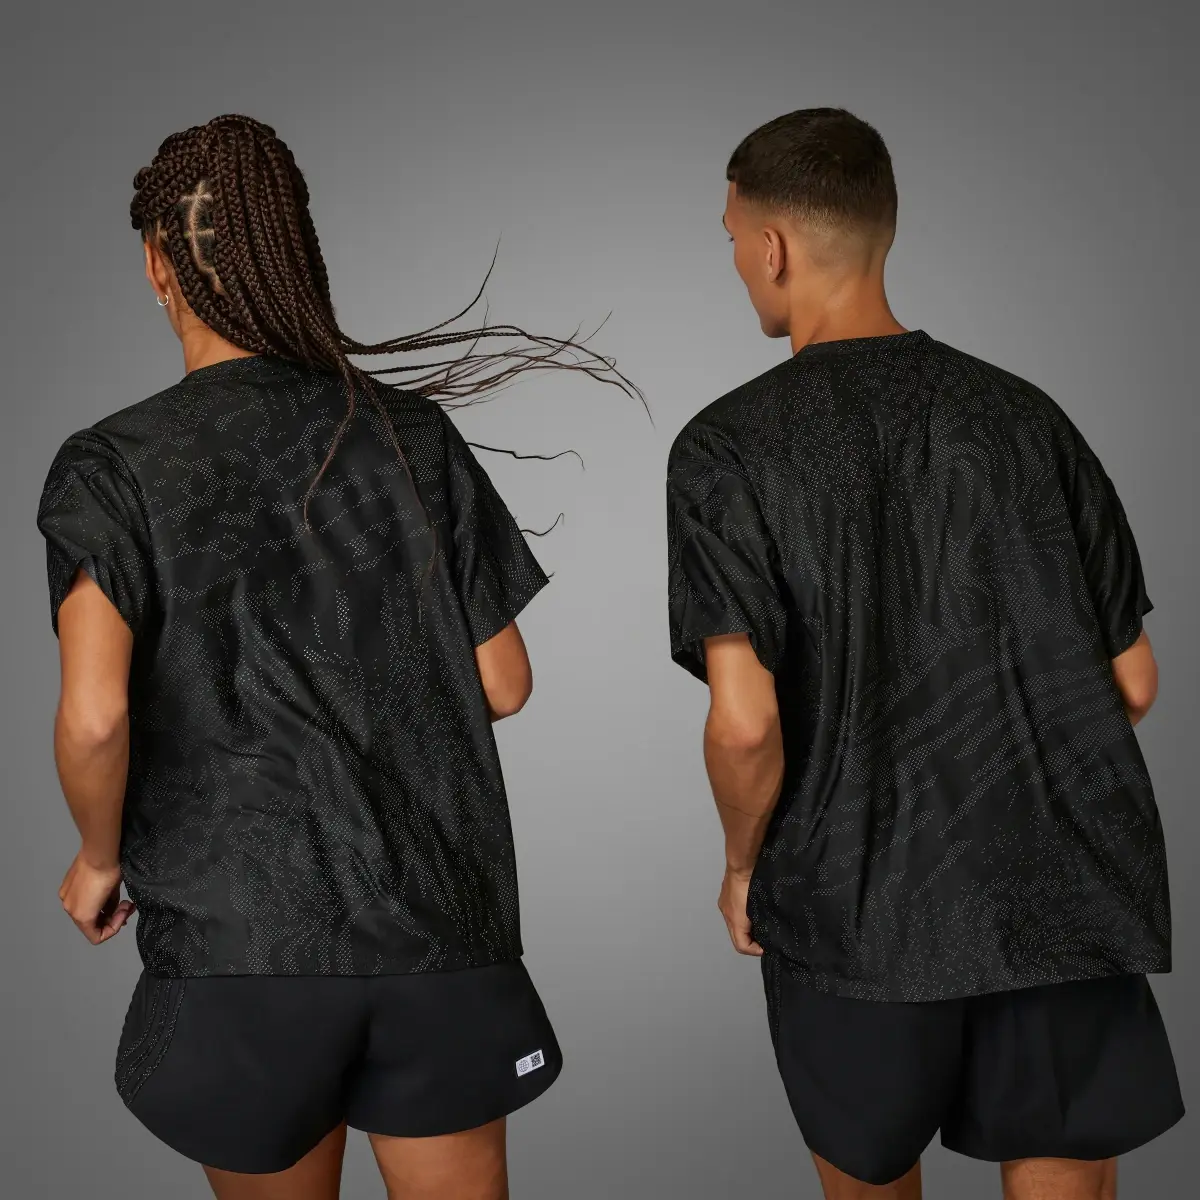 Adidas Made to Be Remade Running T-Shirt (Gender Neutral). 2